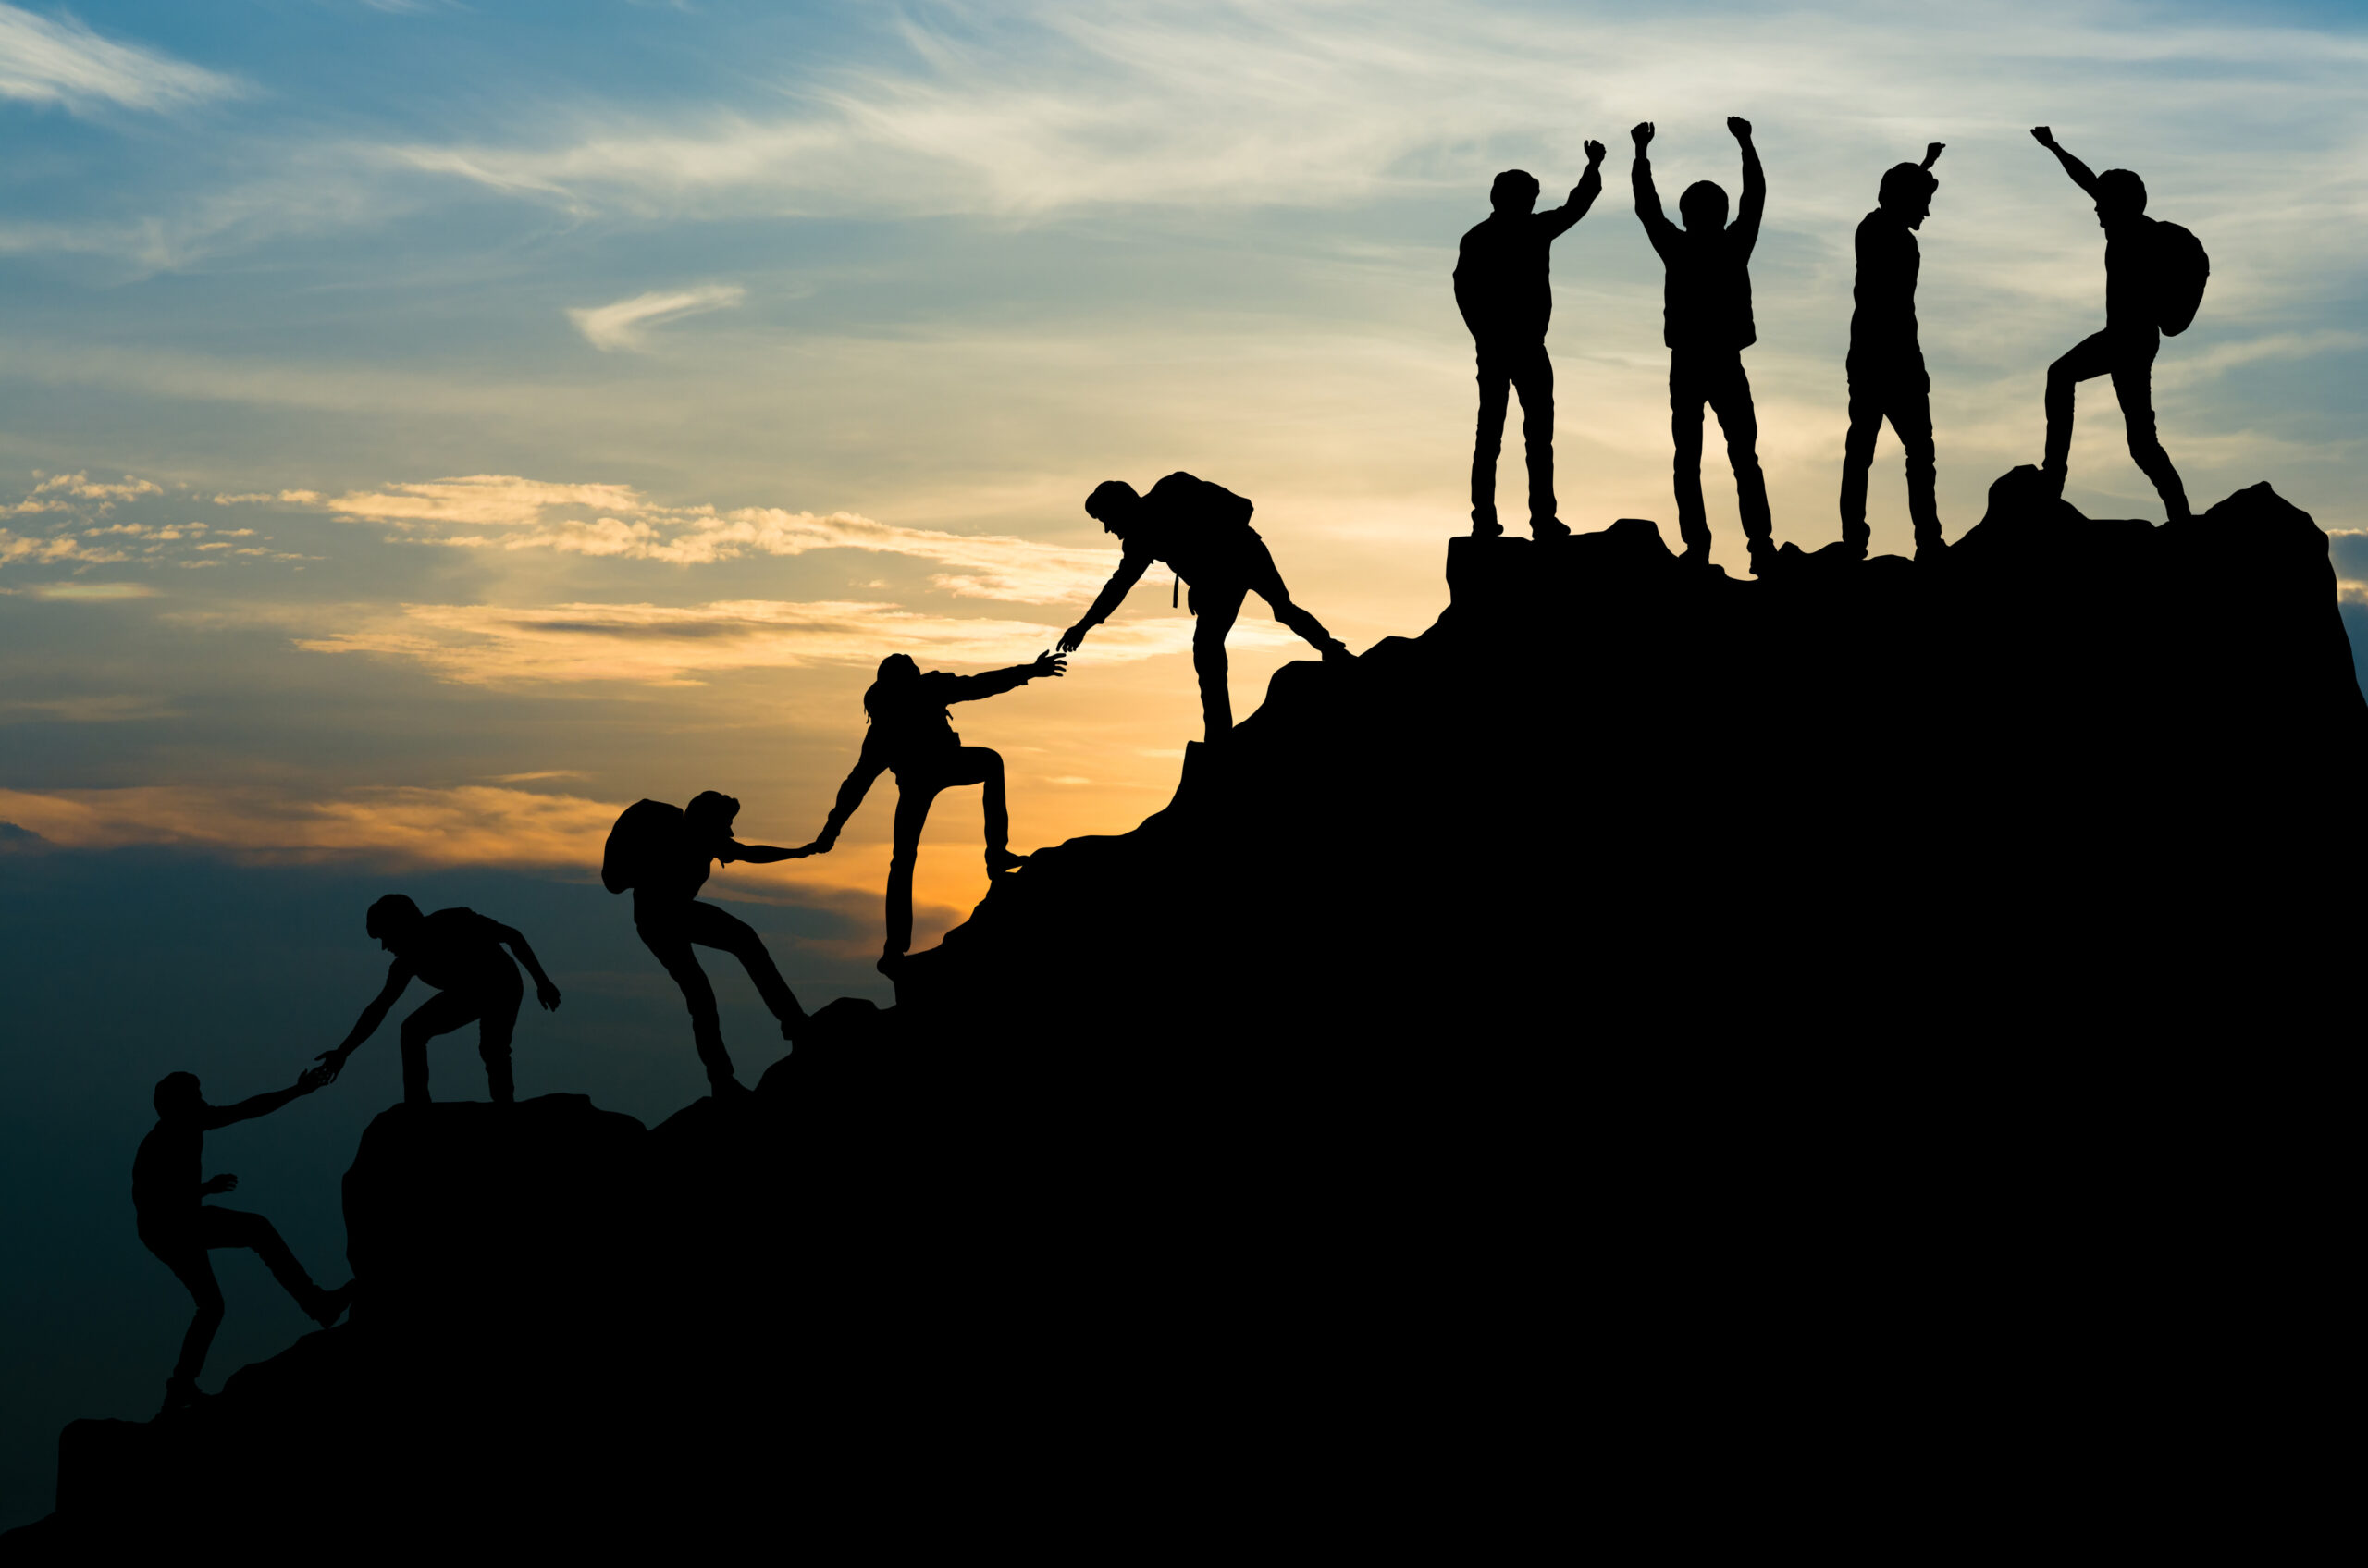 People helping each other climb a mountain with a sunset as background image of new podcast episode of Harvesting Happiness Talk Radio called Lessons in Transformation: Mindful, Positive Leadership with John Perkins & Manny Weintraub